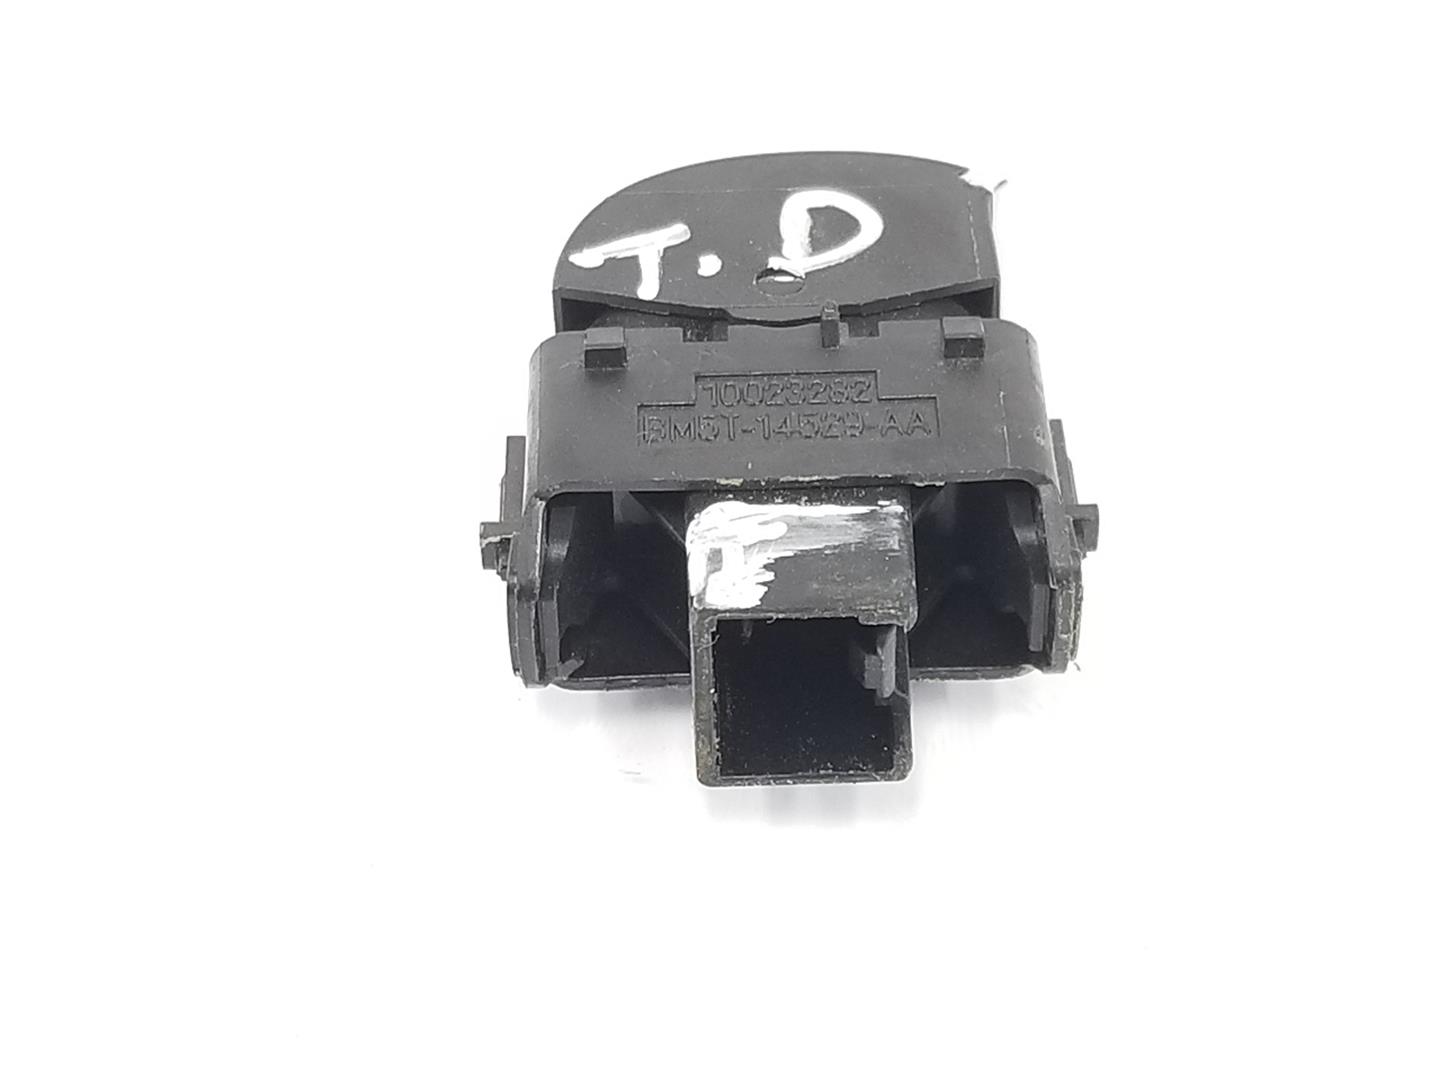 FORD C-Max 2 generation (2010-2019) Rear Right Door Window Control Switch 1850432, F1ET14529AA 20776127